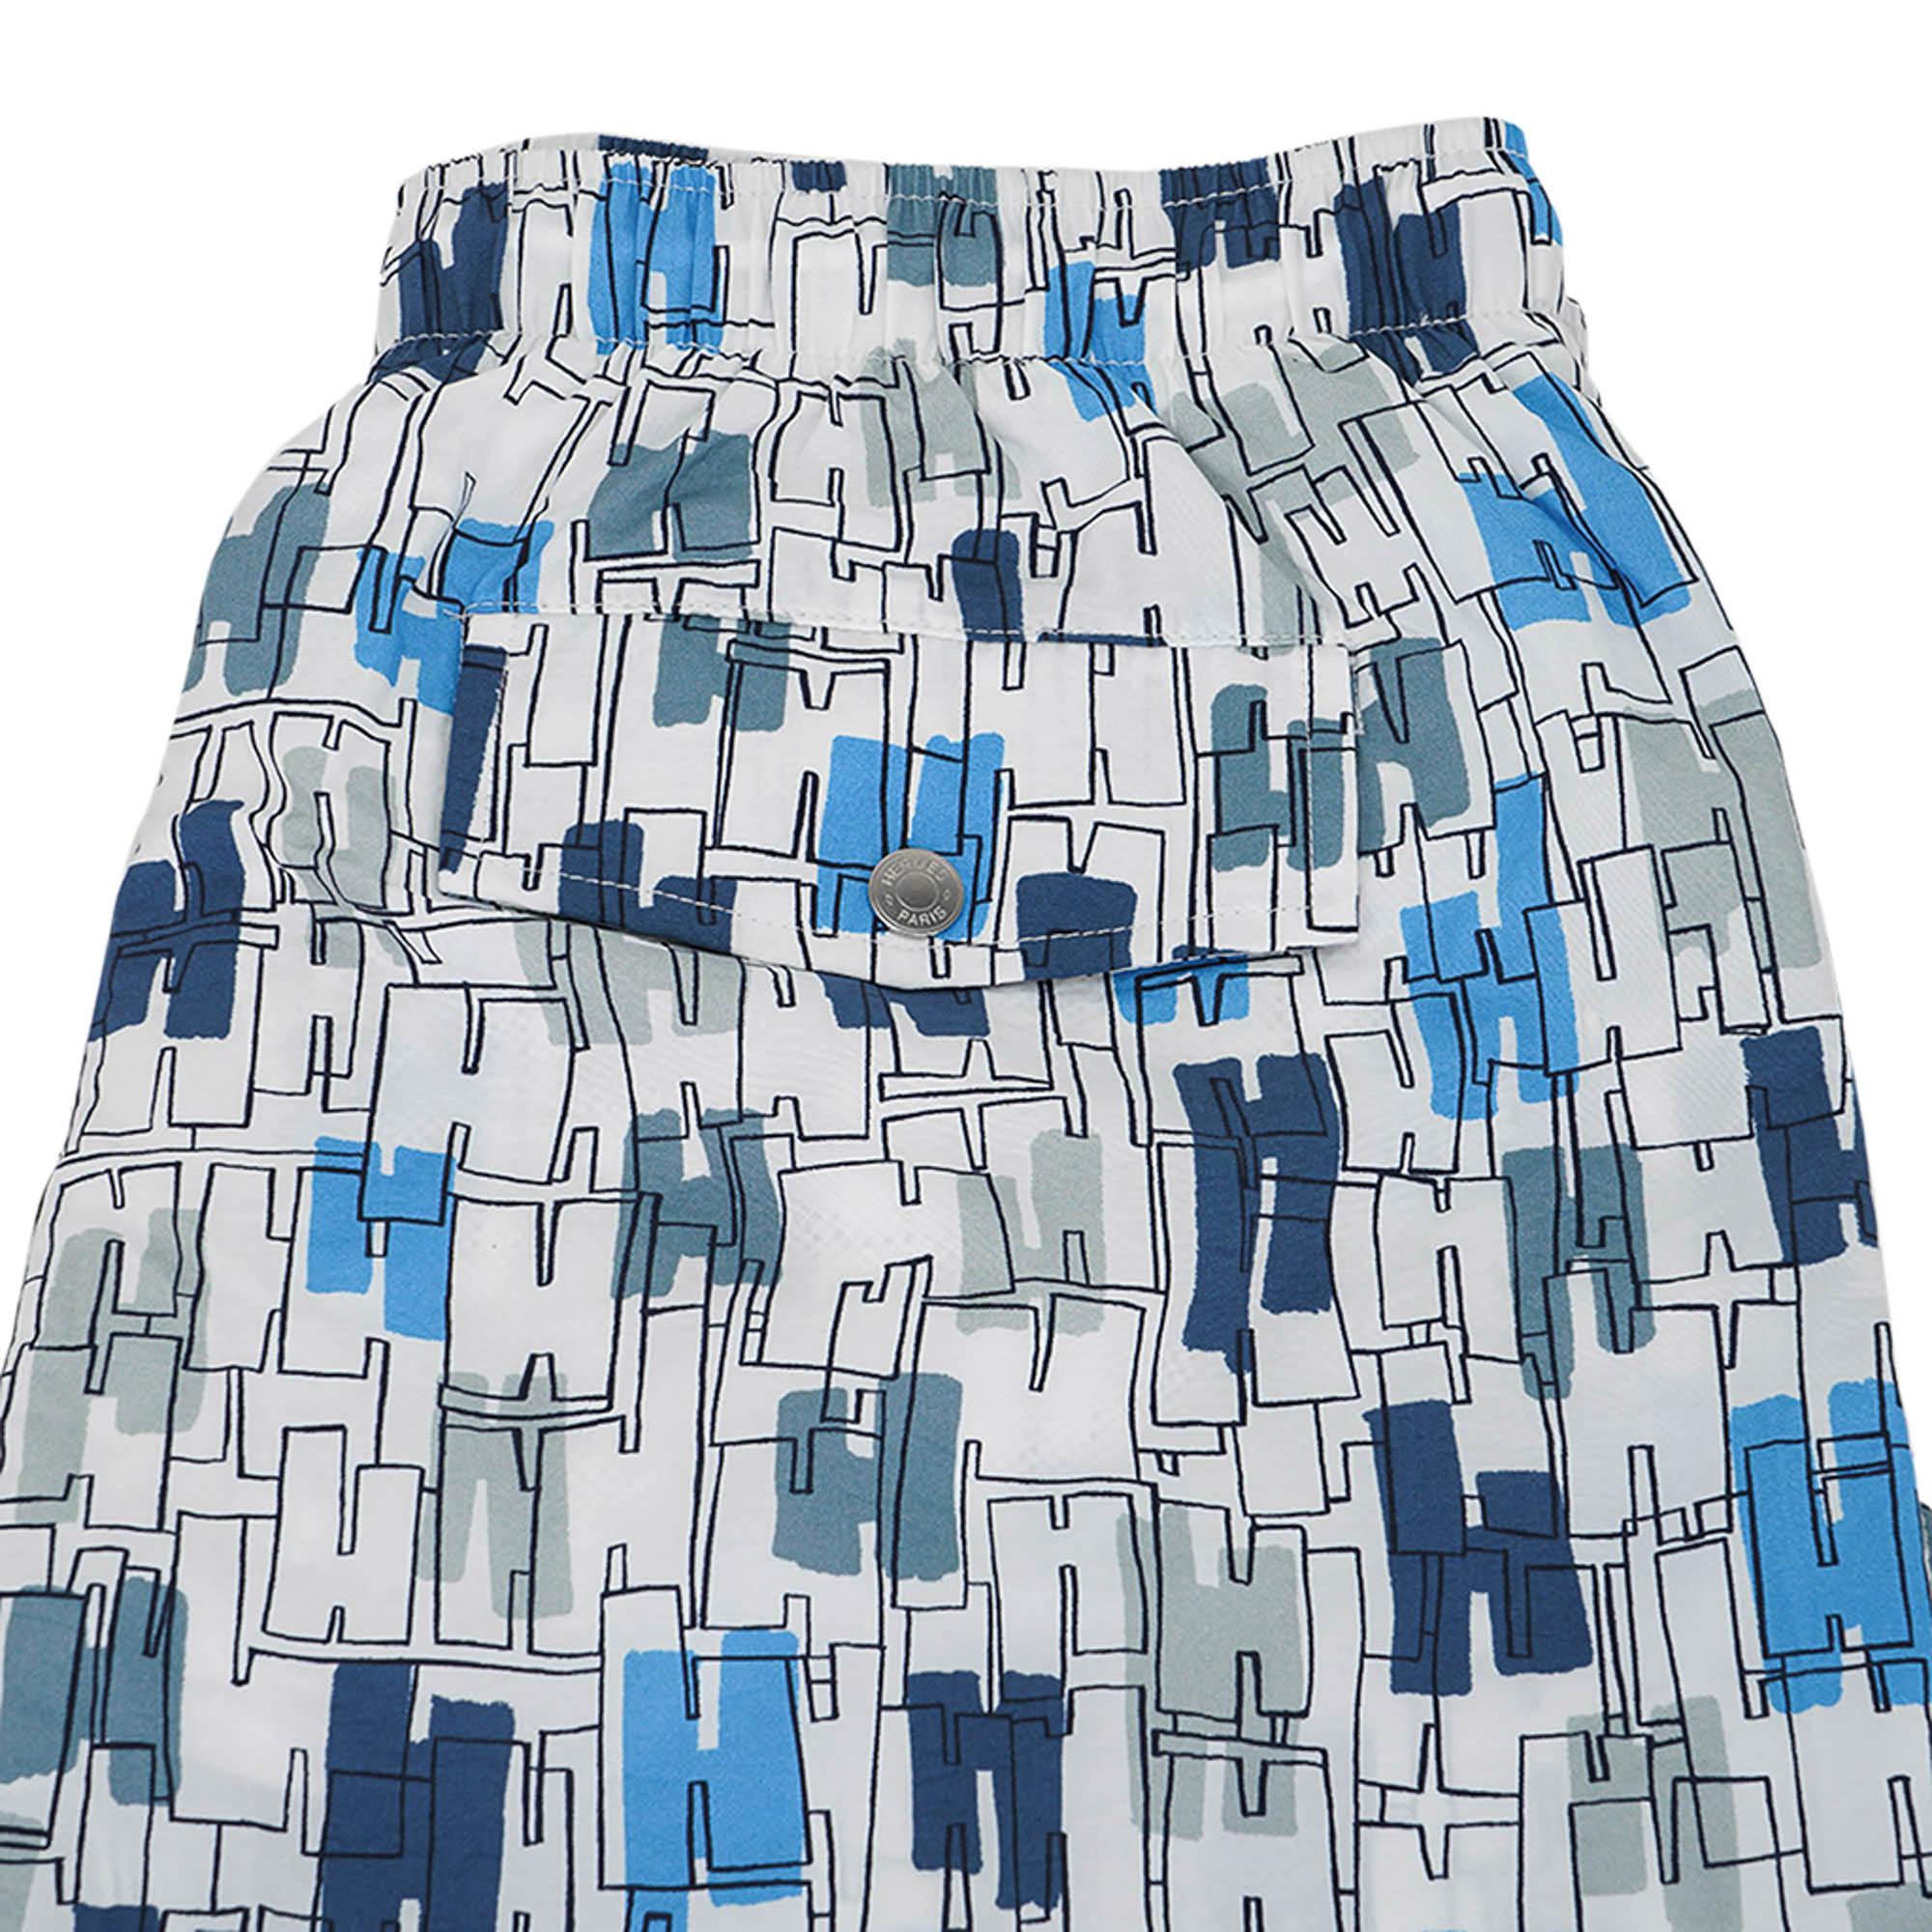 Hermes long swim trunks featured in Coups de Goua'H print.
In Bleu colorway.
H design with a gouache technique where the colours seem to be be under water.
Trunks have an elastic waistband with drawstring for adjustment.
2 side pockets and 1 rear